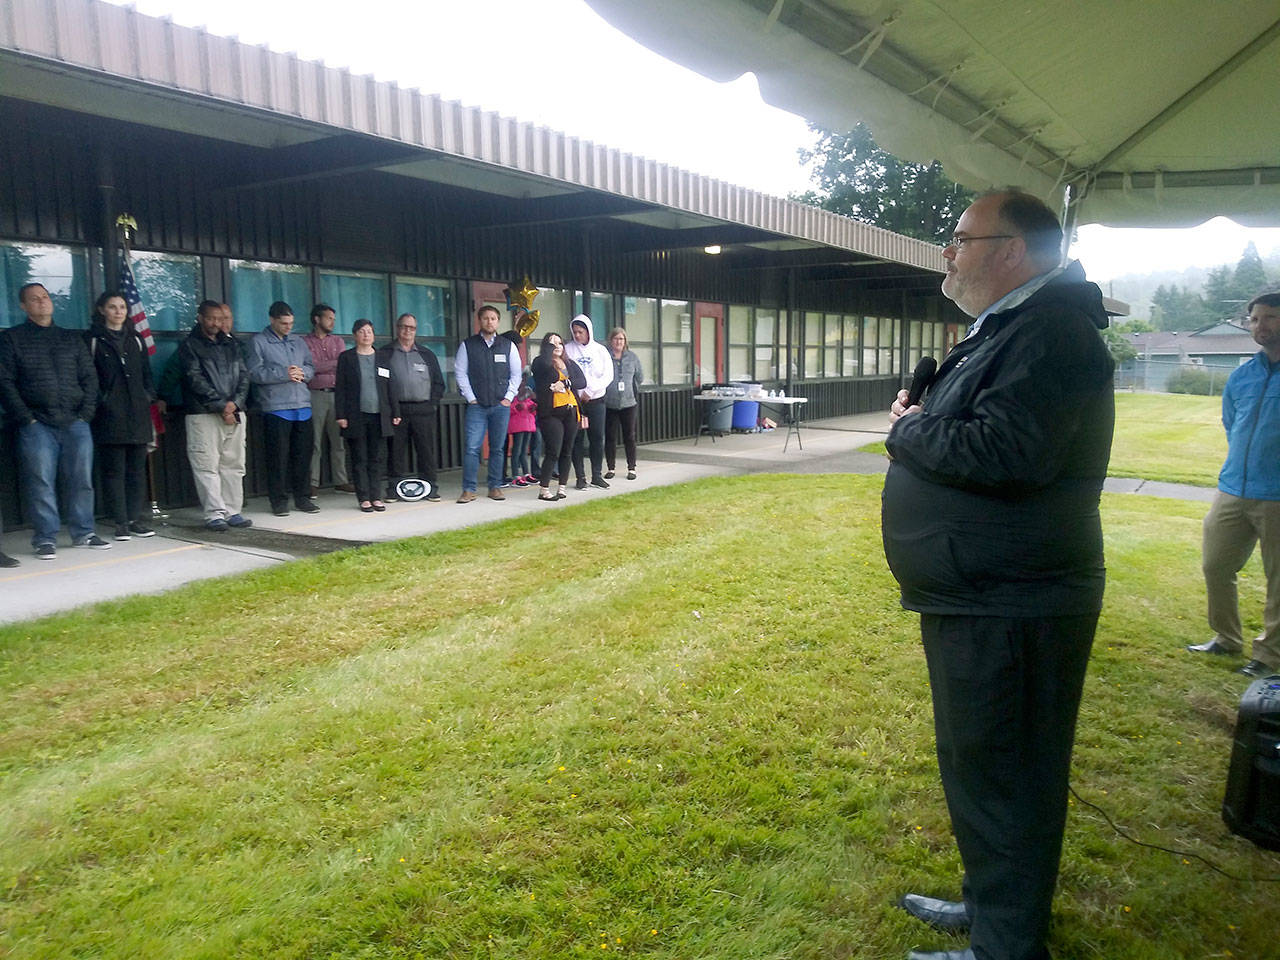 Auburn School District Superintendent Alan Spicciati addresses a crowd under cover from the rain during a groundbreaking ceremony for the new Dick Scobee Elementary School last Friday. The new school, which will replace the old one at the same location, is scheduled to open in 2020. ROBERT WHALE, Auburn Reporter